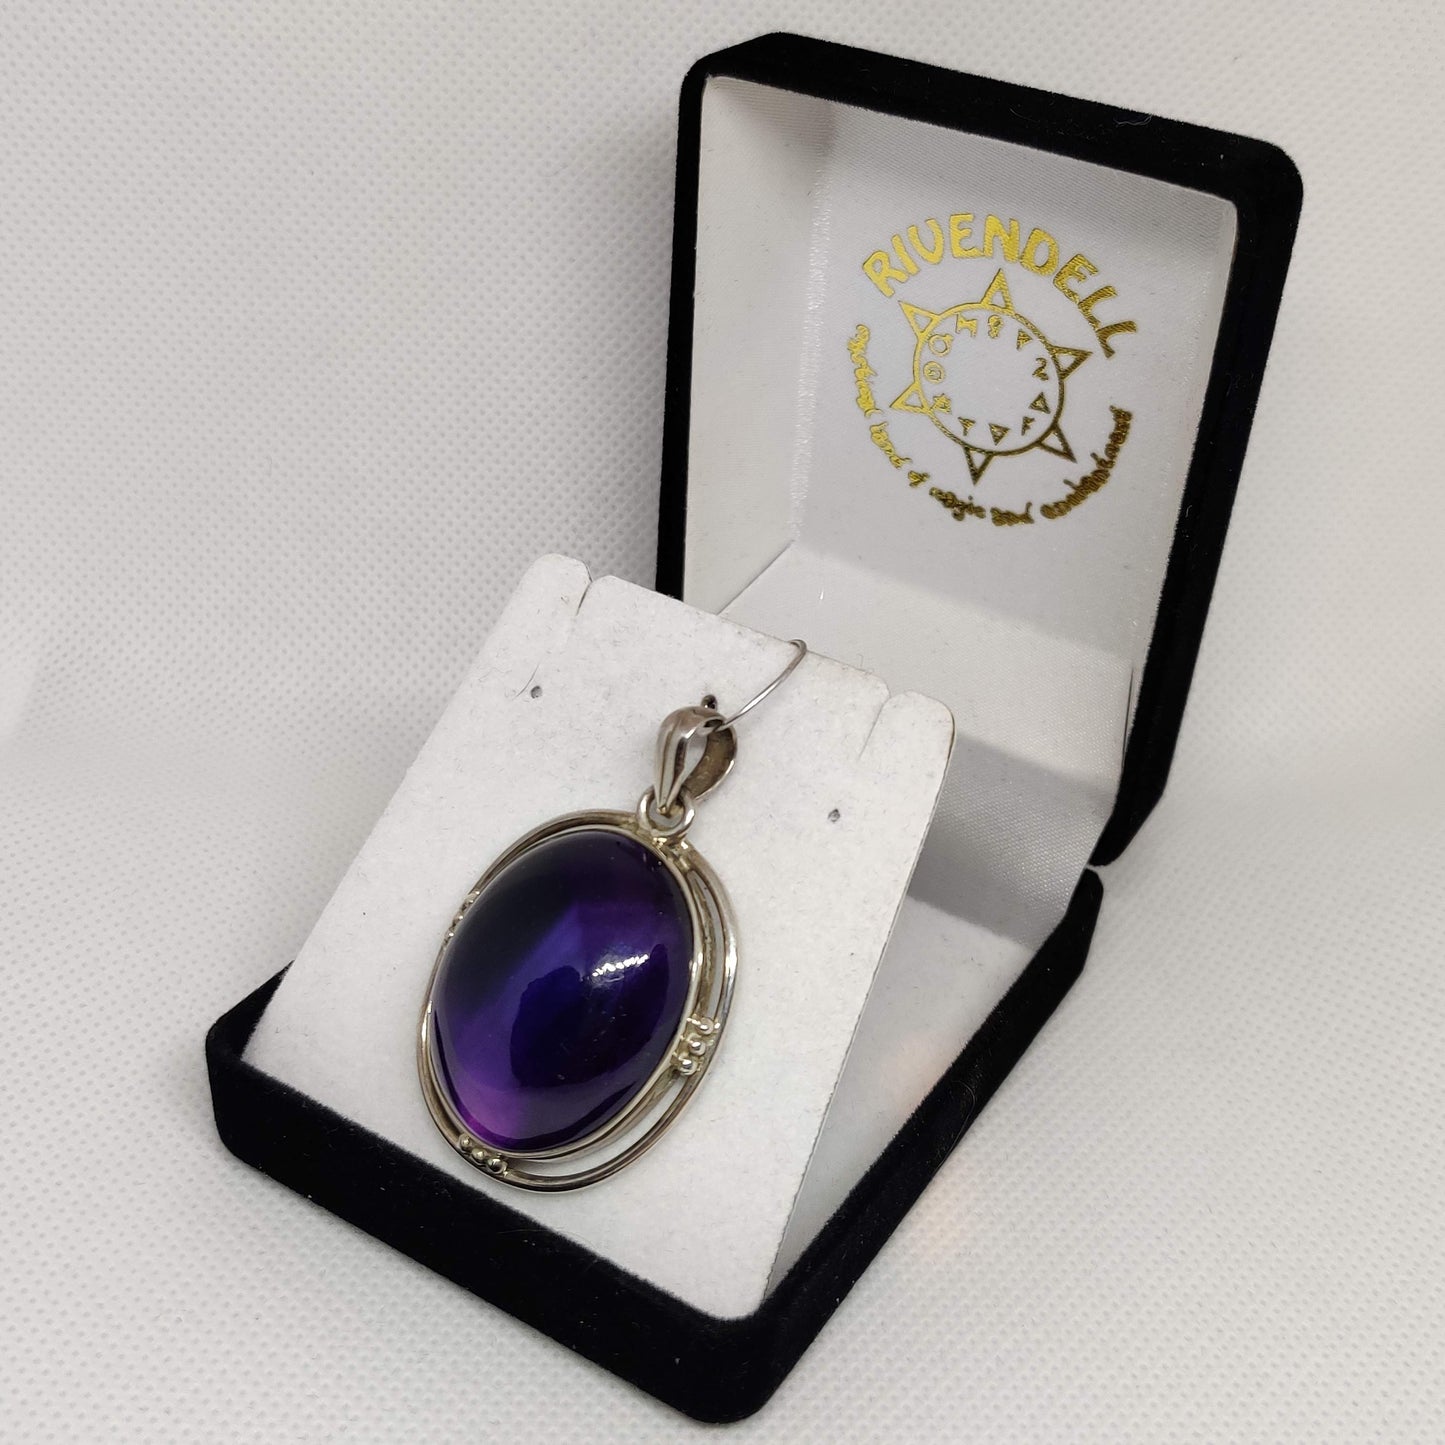 Large Oval Amethyst 925 Sterling Silver Pendant with double bezel setting - Rivendell Shop